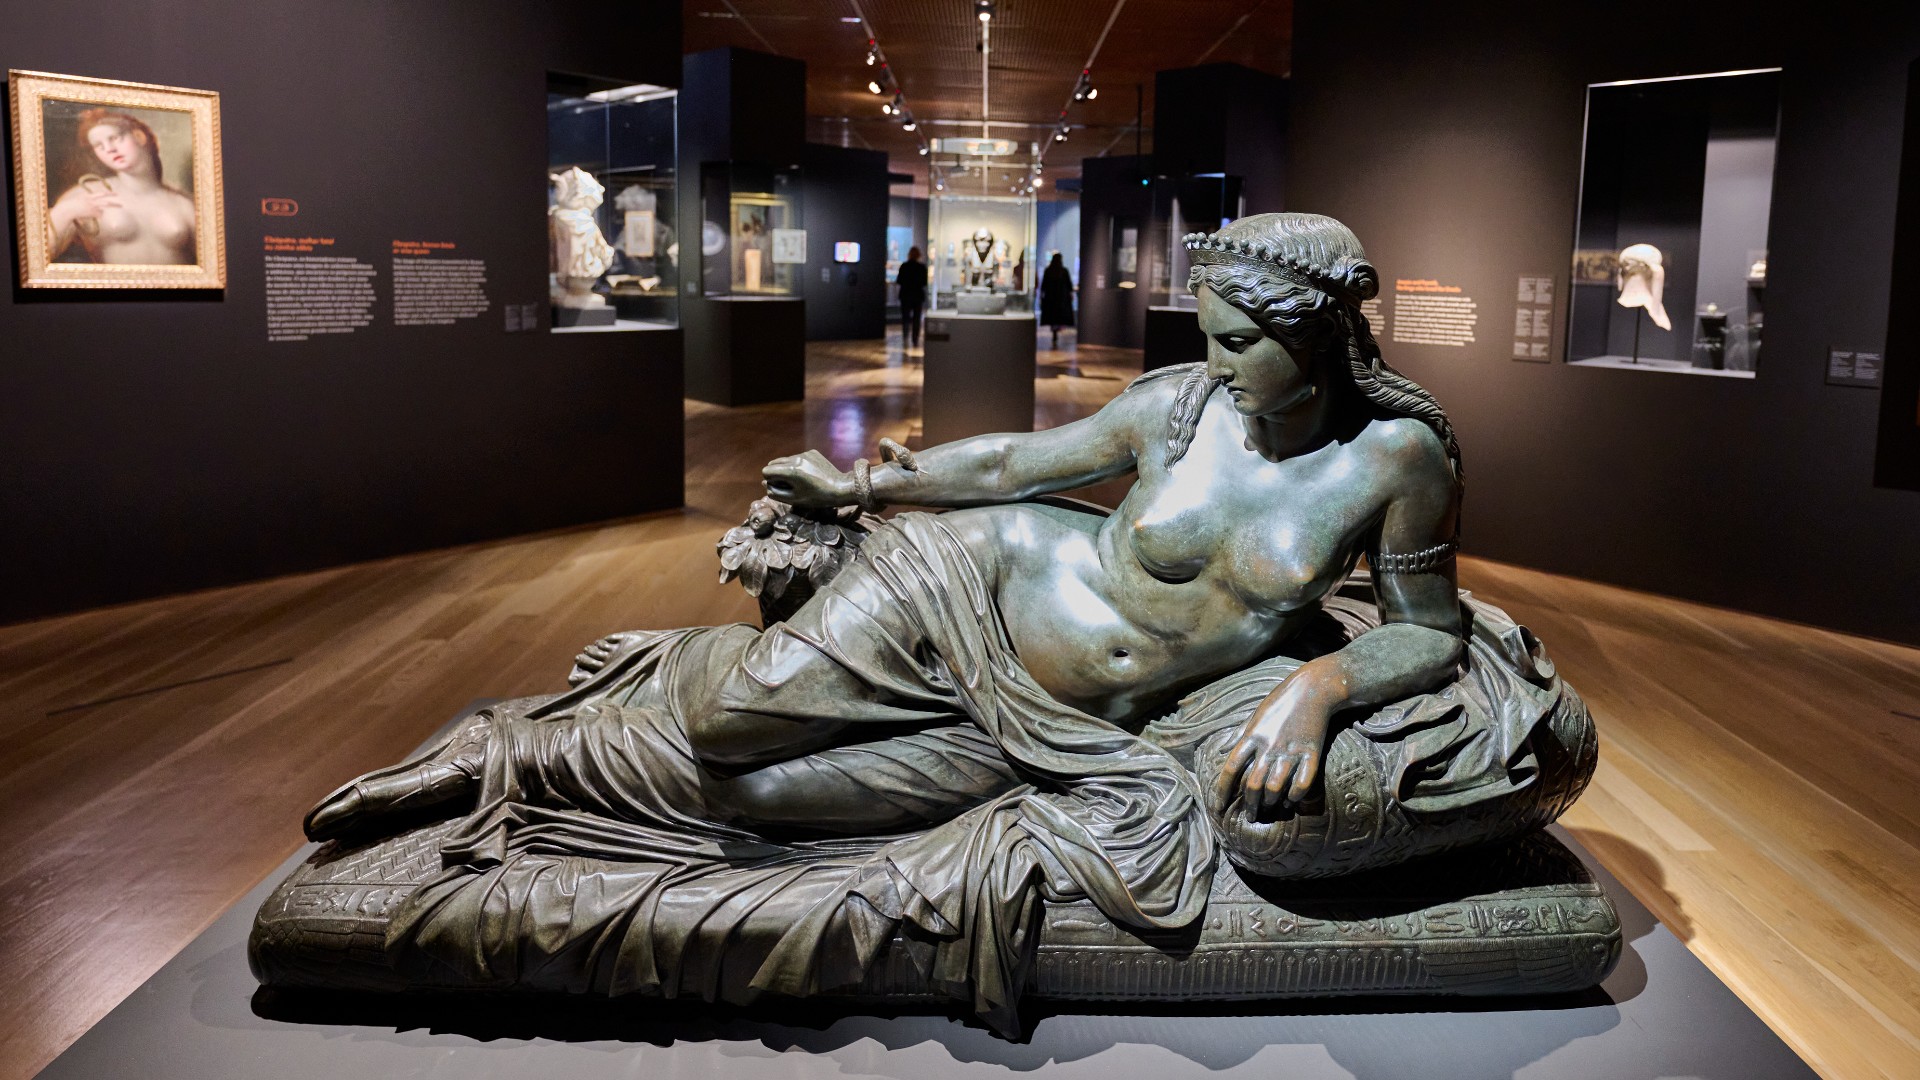 The statue of Cleopatra with Asp serpent seen on display during a press visit to 